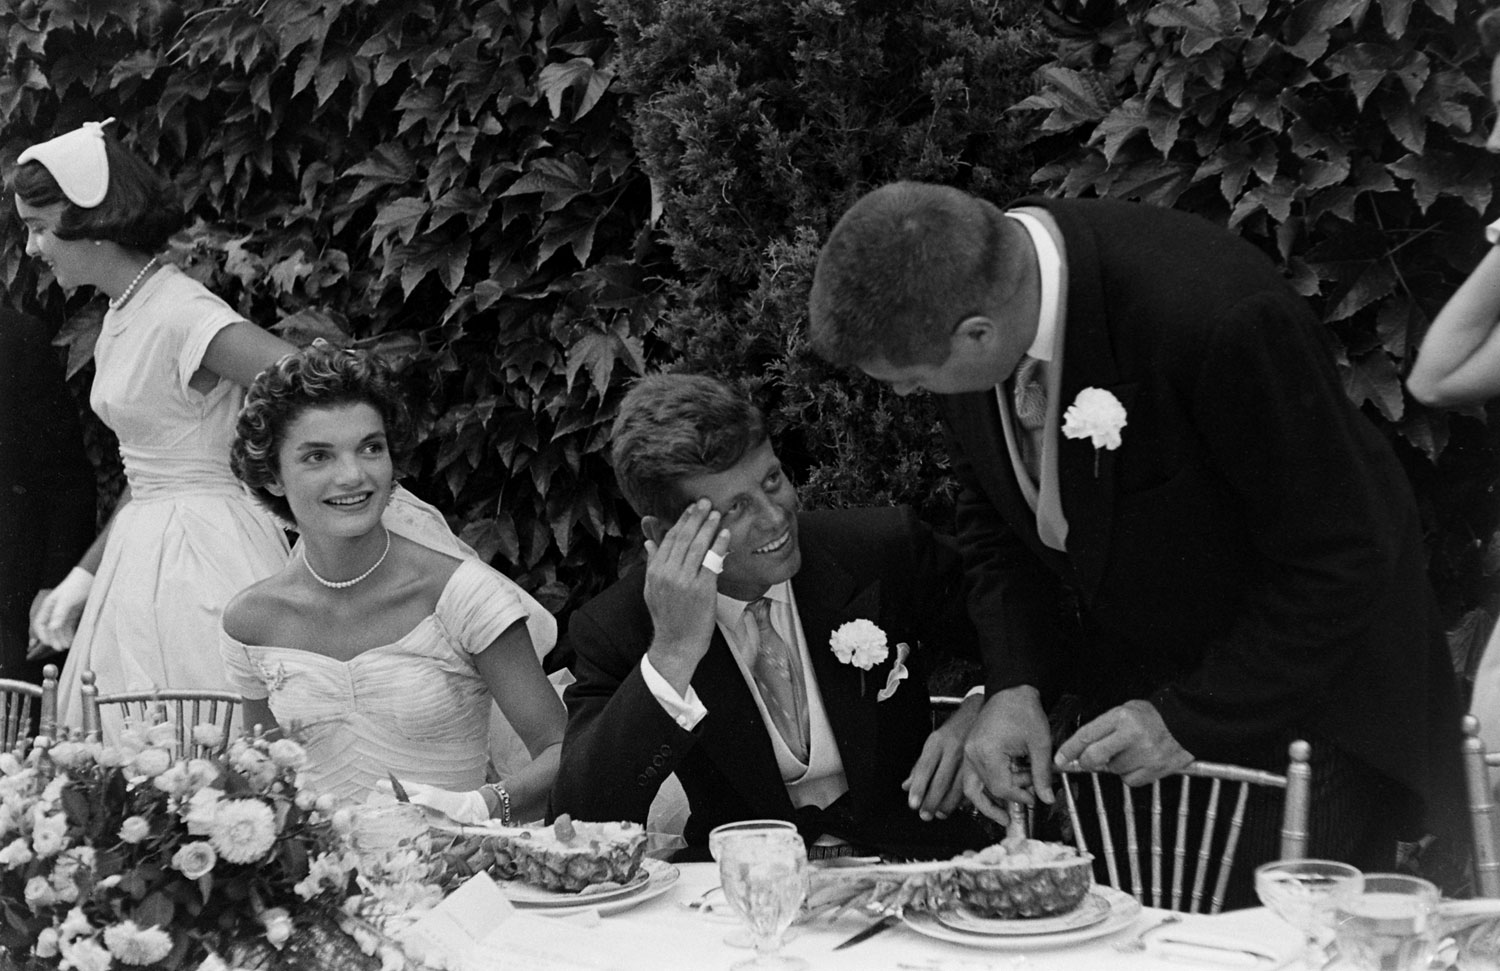 John and Jackie Kennedy on their wedding day, Newport, R.I., Sept. 12, 1953.